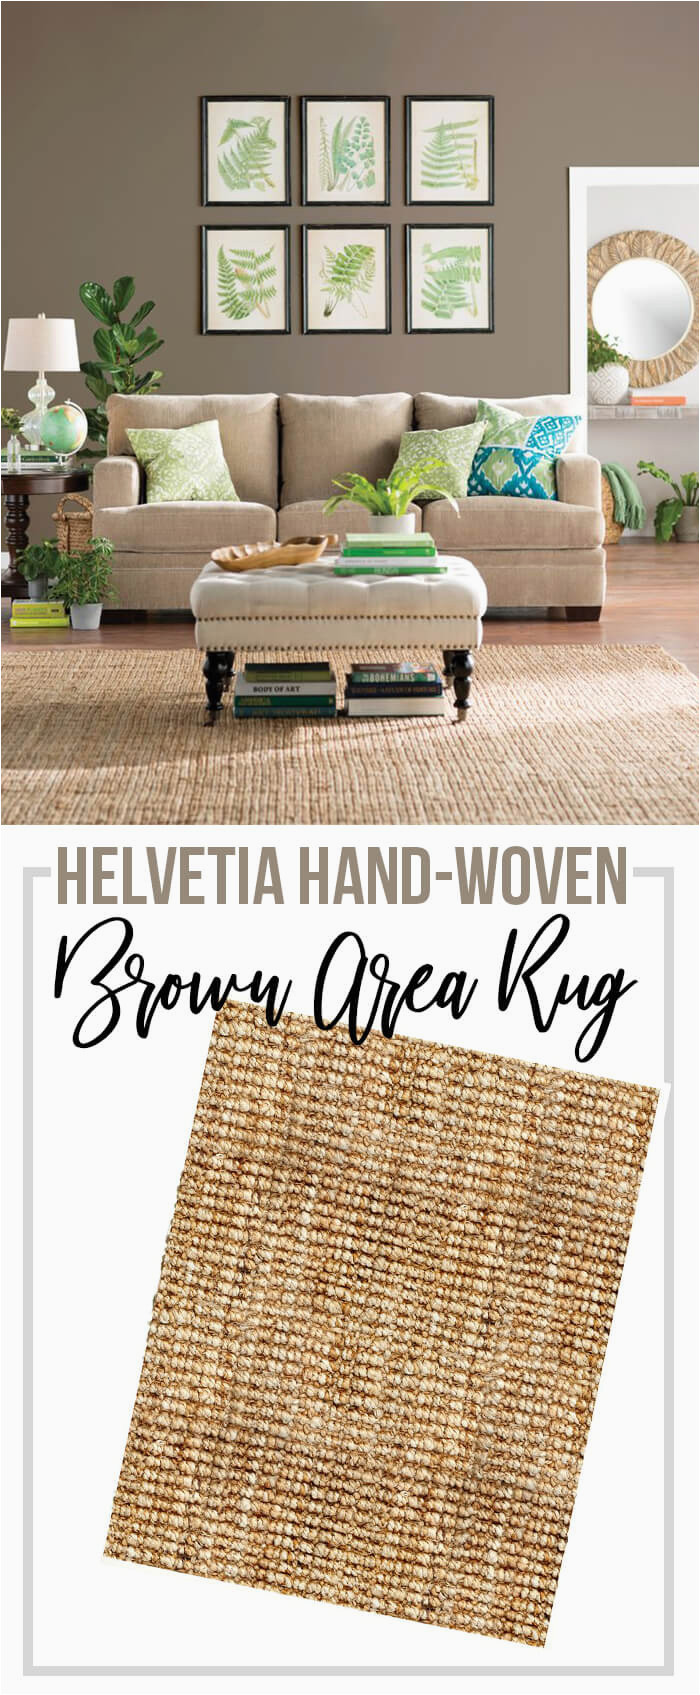 Helvetia Hand Woven Brown area Rug 16 Best Farmhouse Rug Ideas and Designs for 2021